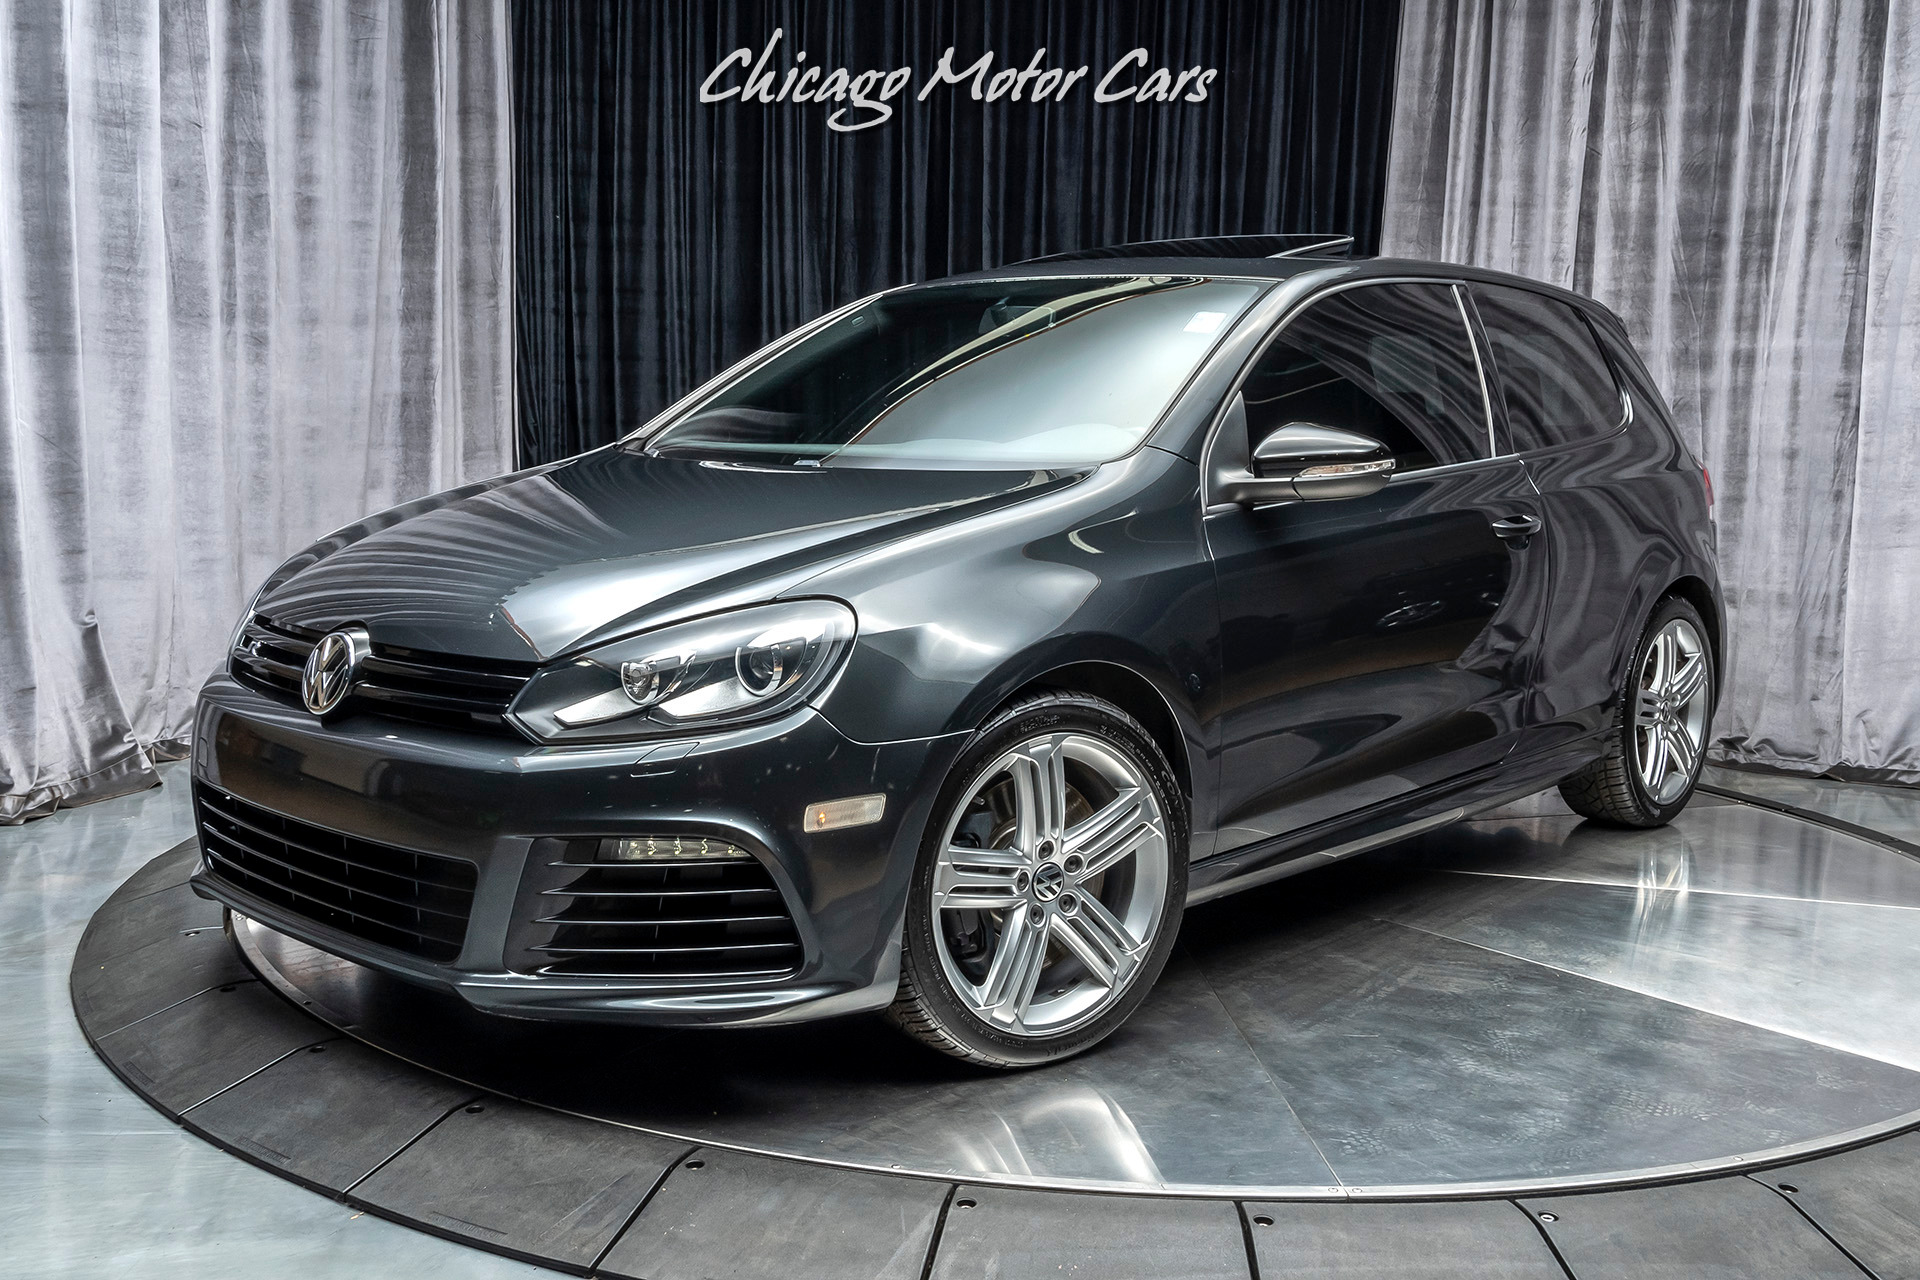 Used 2012 Volkswagen Golf R 2 Door w/Sunroof & NAV APR STAGE 2 PLUS TUNE!  For Sale (Special Pricing) | Chicago Motor Cars Stock #16277A